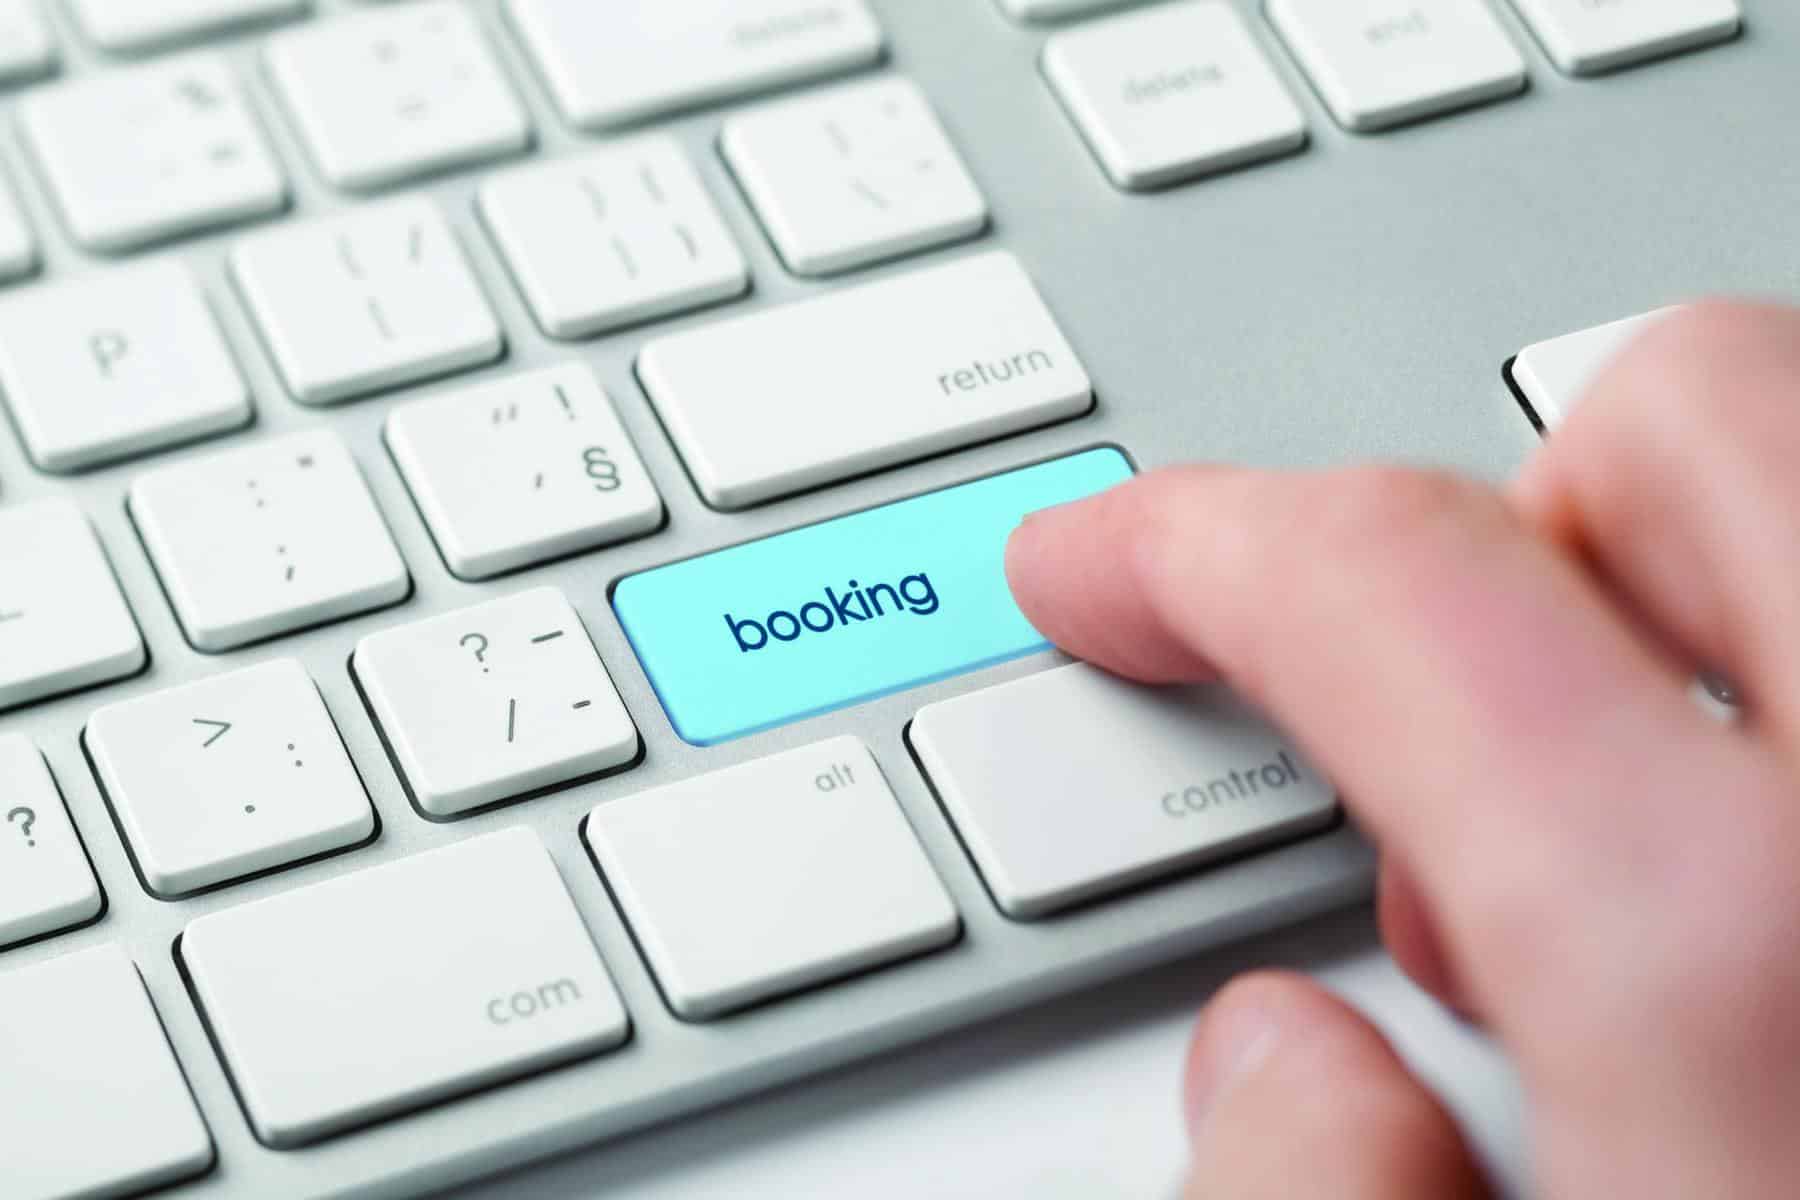 Online booking concept